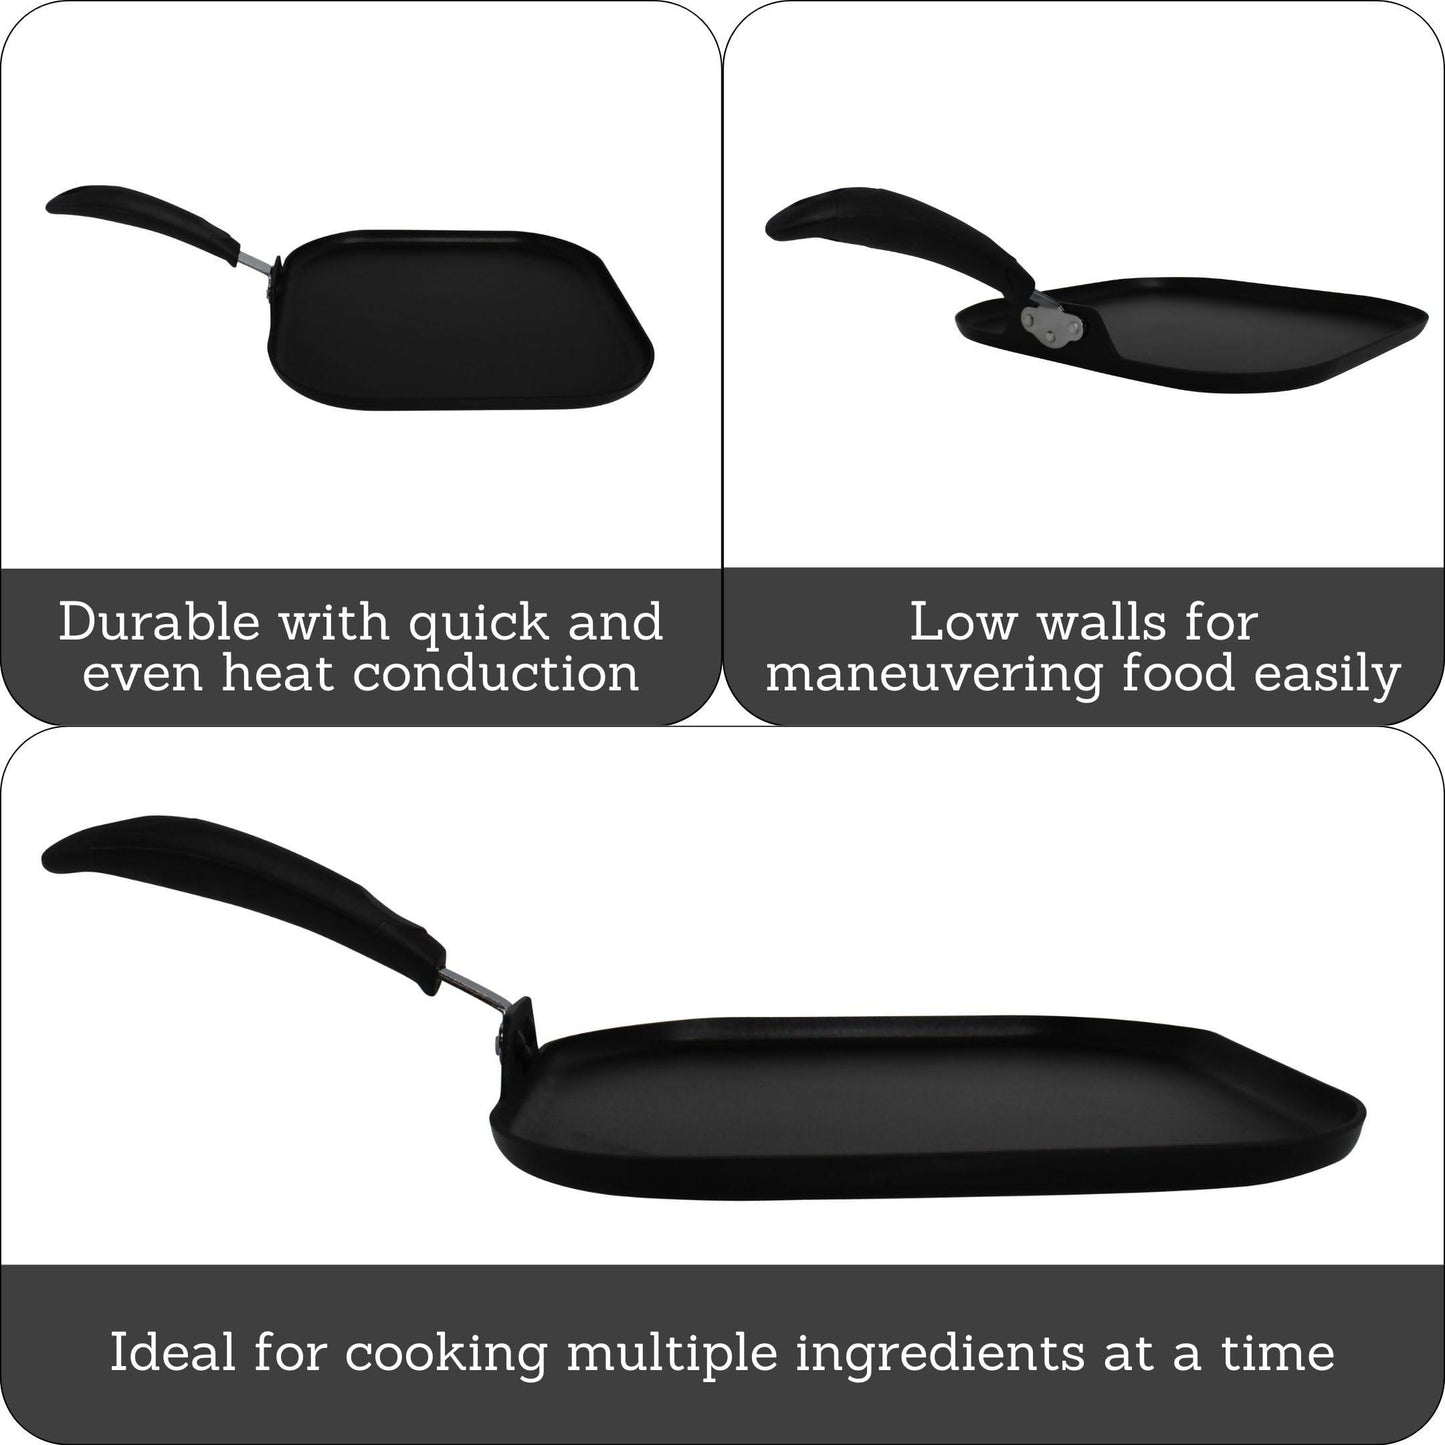 IMUSA USA 11" Nonstick Gourmet Square Griddle, Black - CookCave